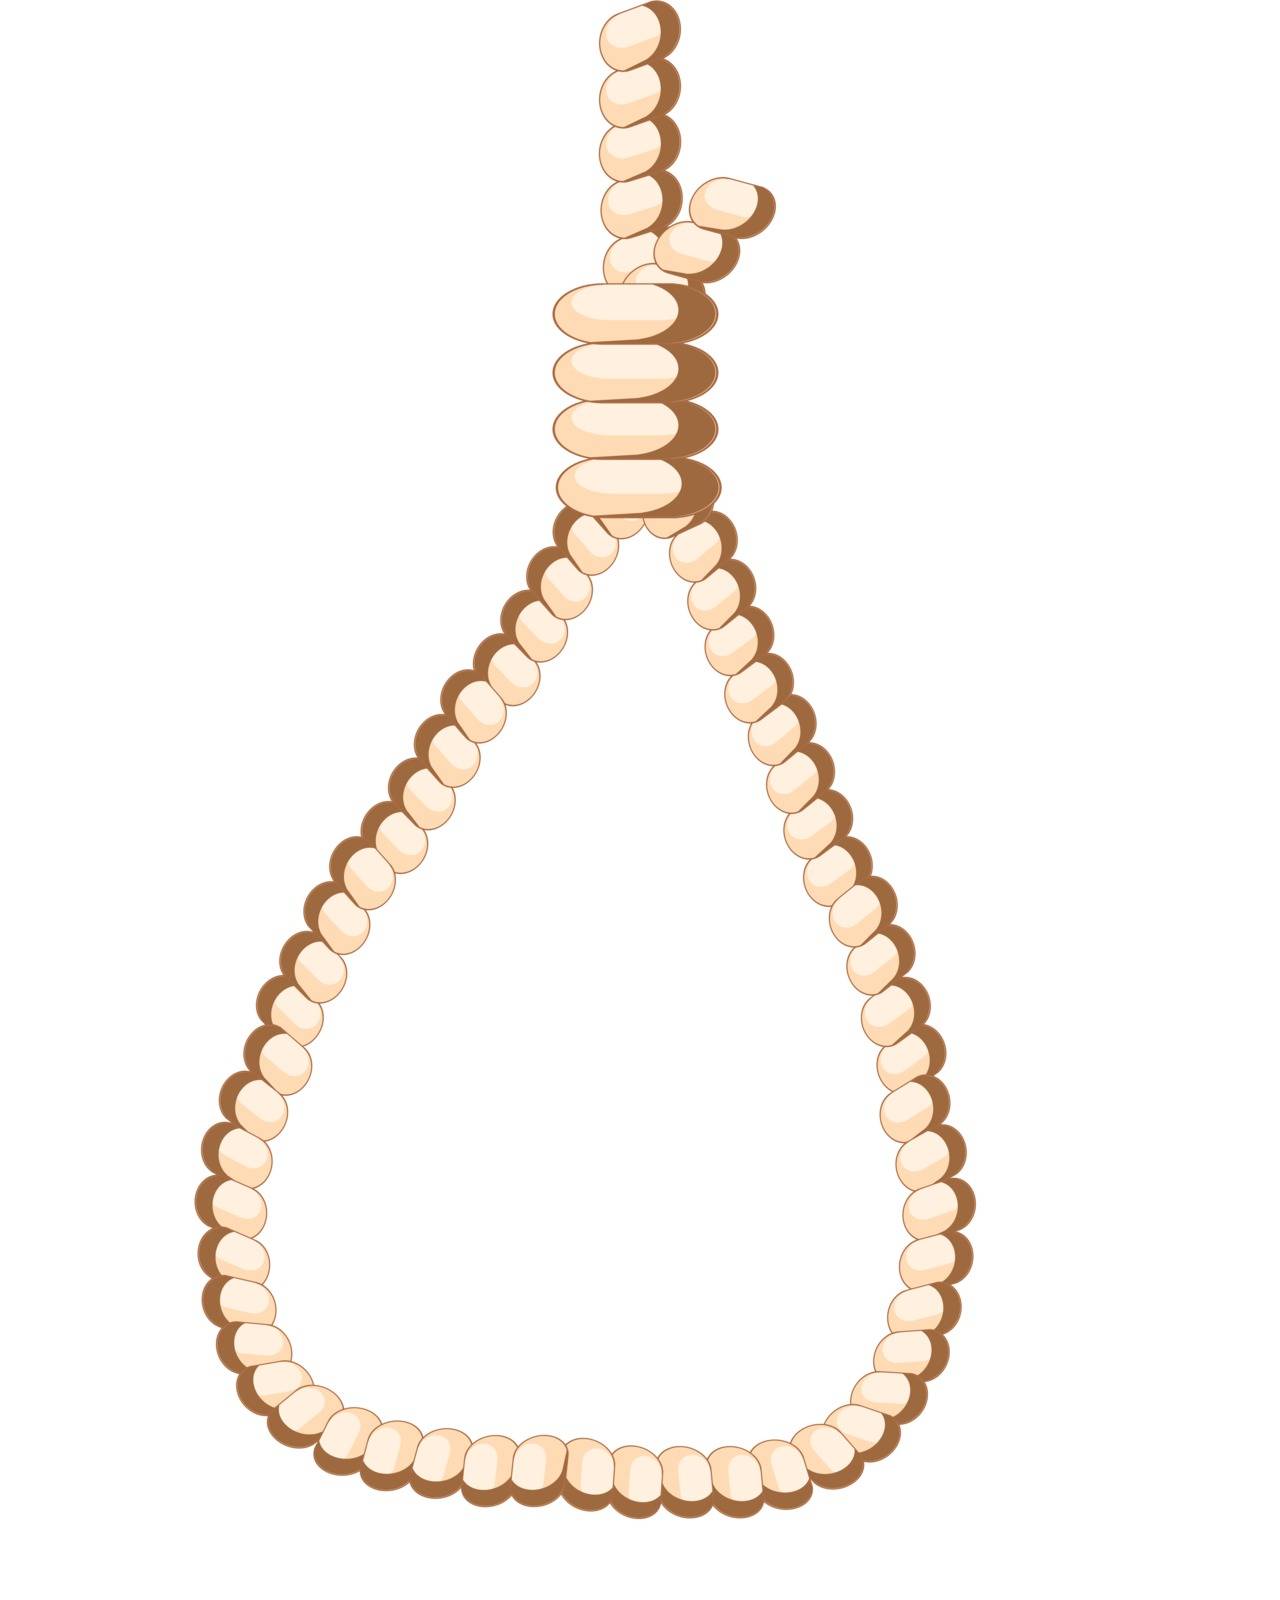 Rope loop for gallows on white background is insulated